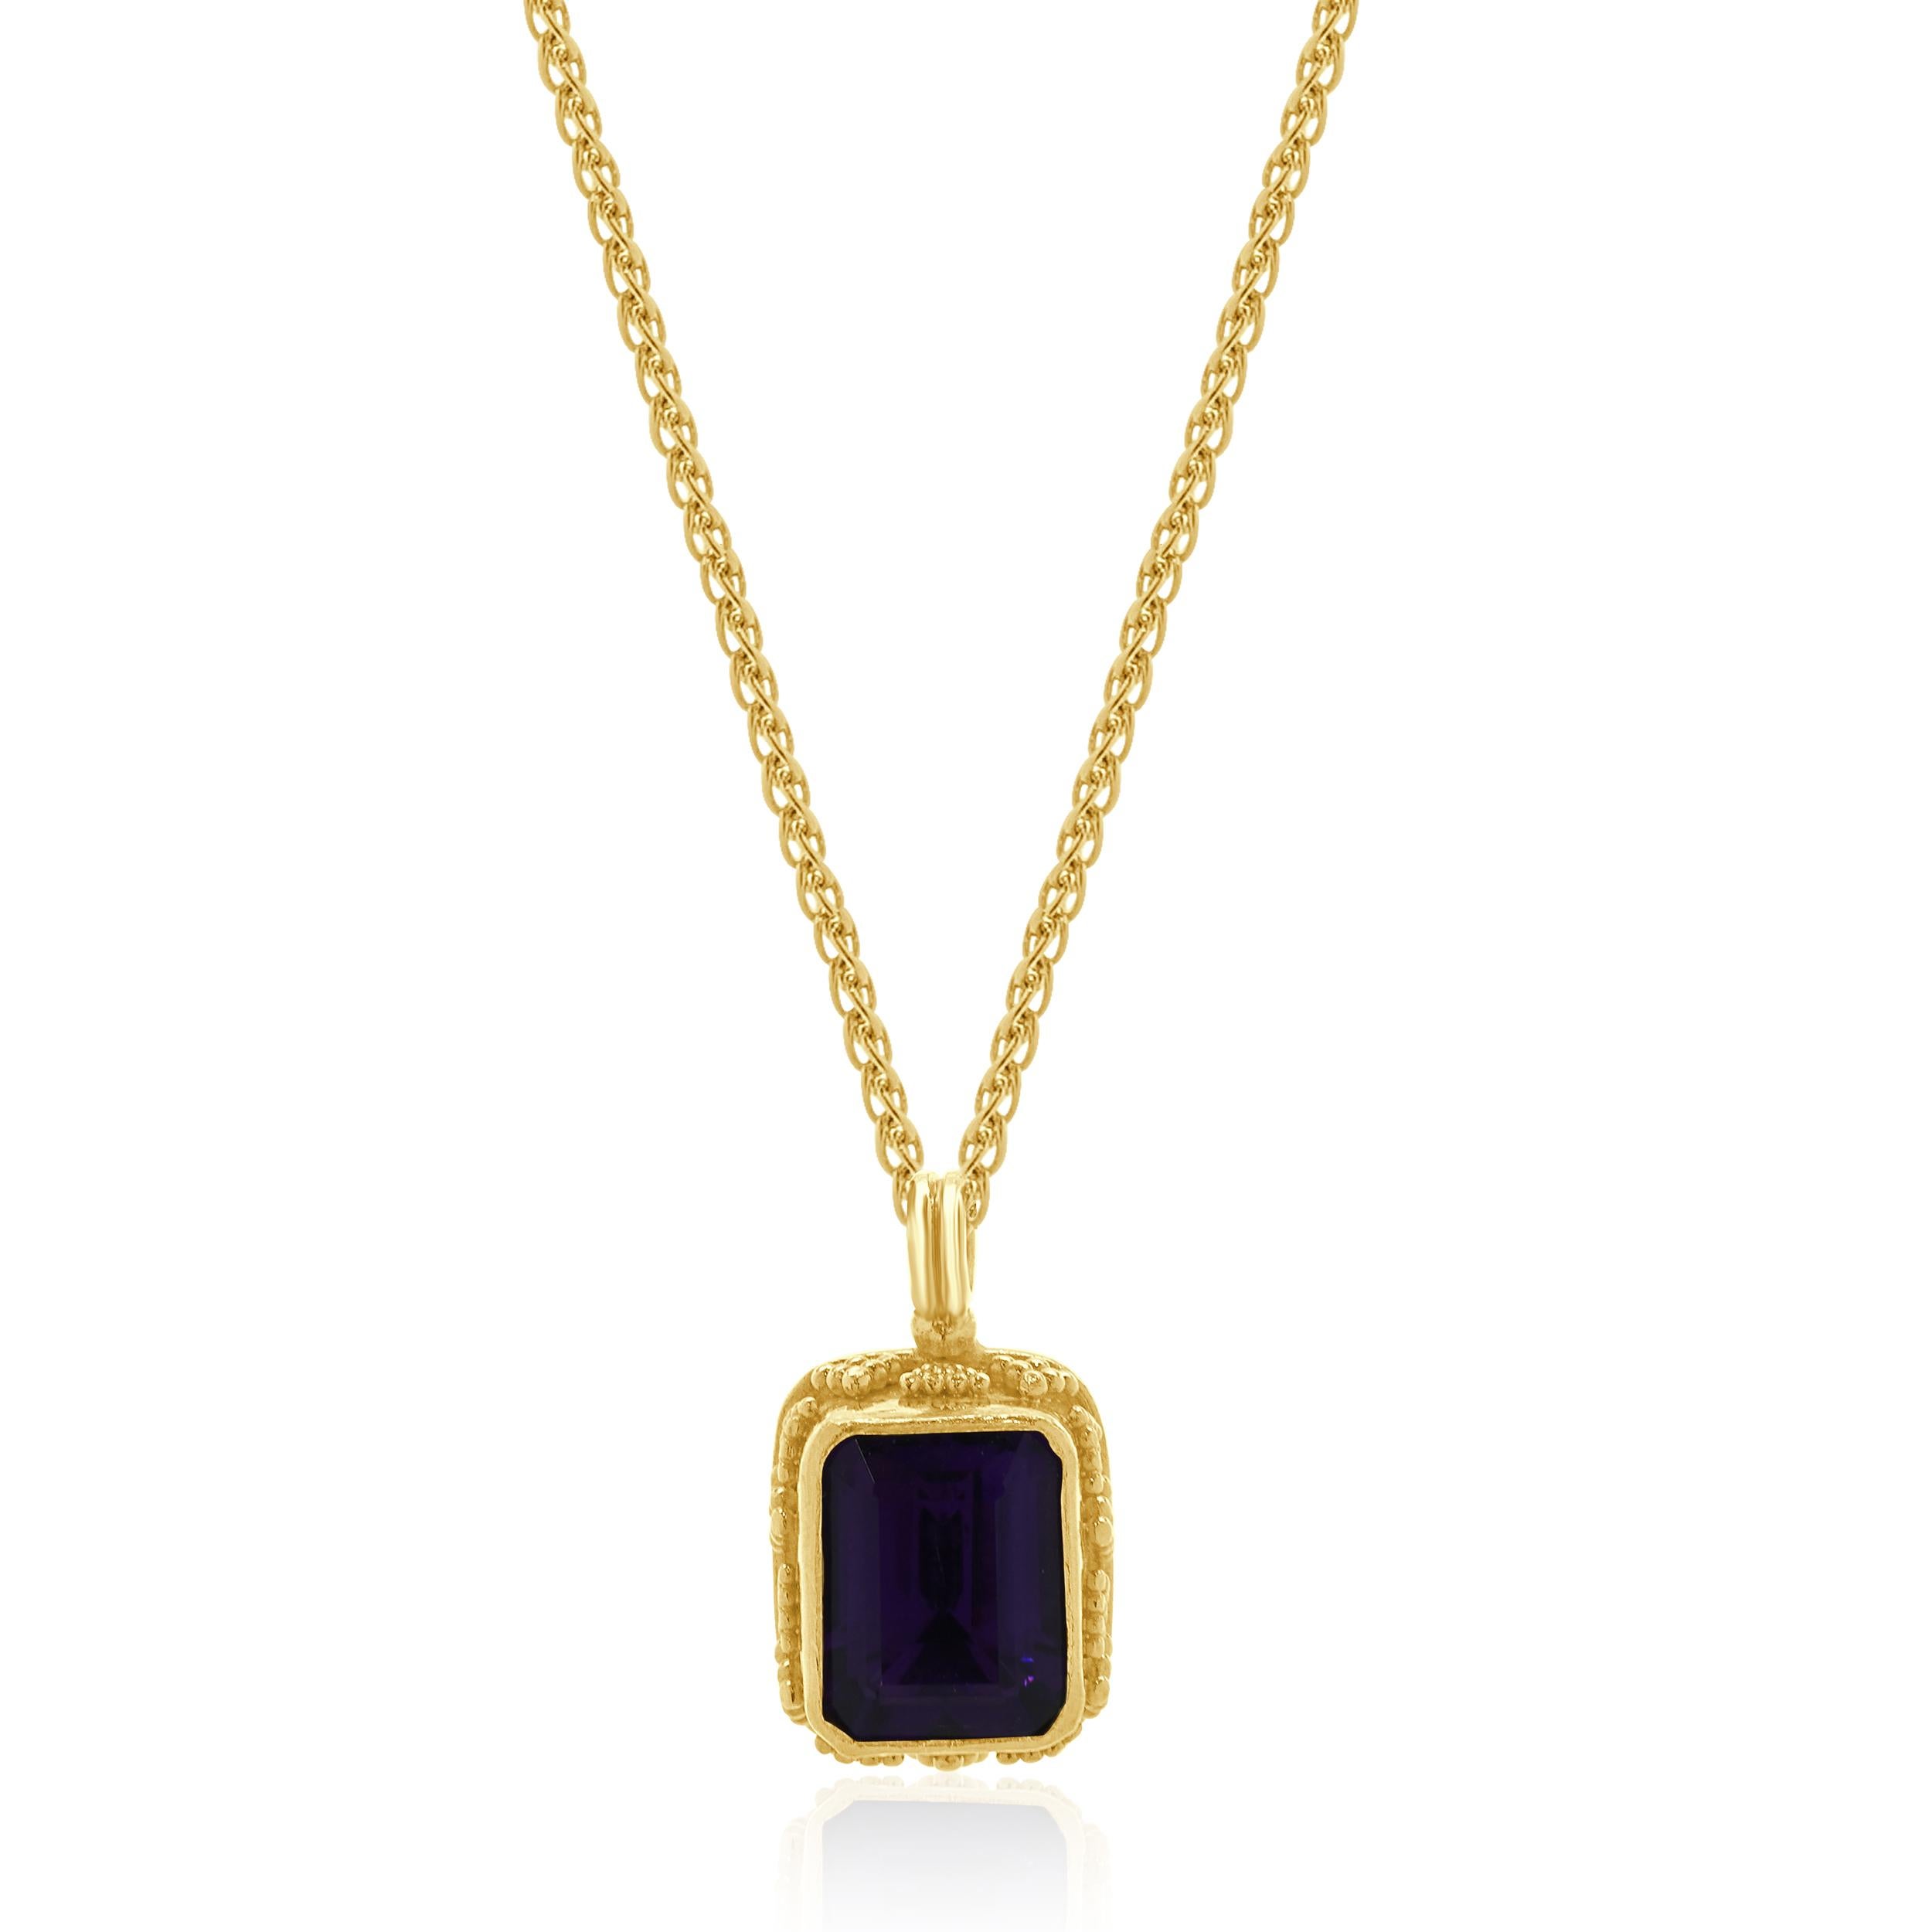 Designer: Luna Felix
Material: 22/14K yellow gold
Amethyst: 1 emerald cut = 2.25ct
Dimensions: necklace measures 18-inches in length
Weight: 6.78 grams
